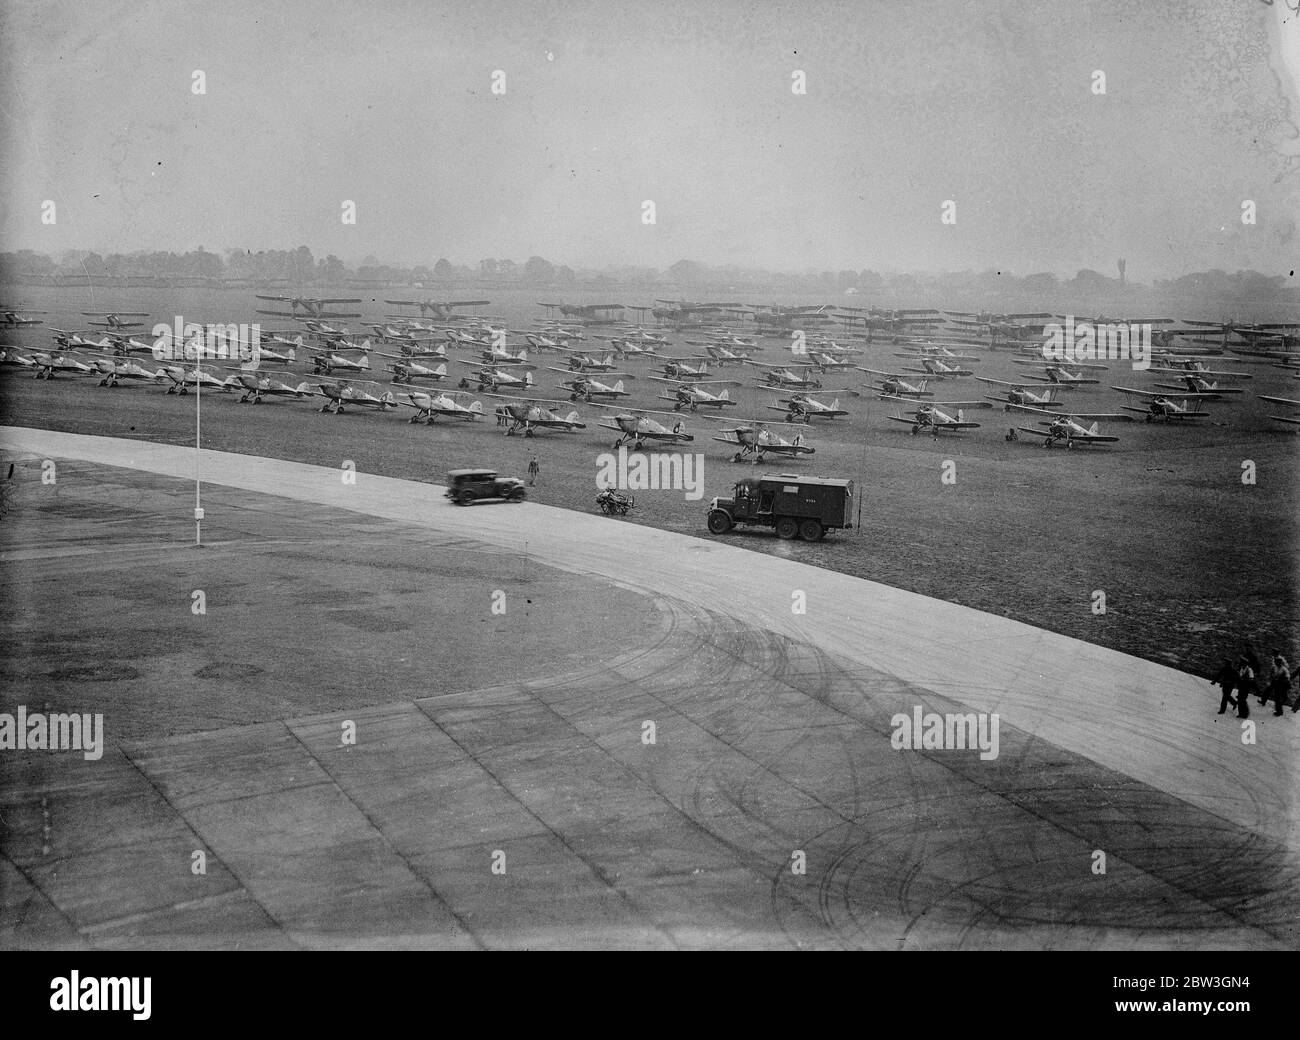 RAF Mildenhall , stands in preparation to welcome King George V, who is to come to the base to conduct the first ever Royal Review of the RAF on July 6, of assembled over 356 of its combat aircraft, and made up of 38 squadrons . Photo shows , some of the aircraft lined up . 2 July 1935 Stock Photo